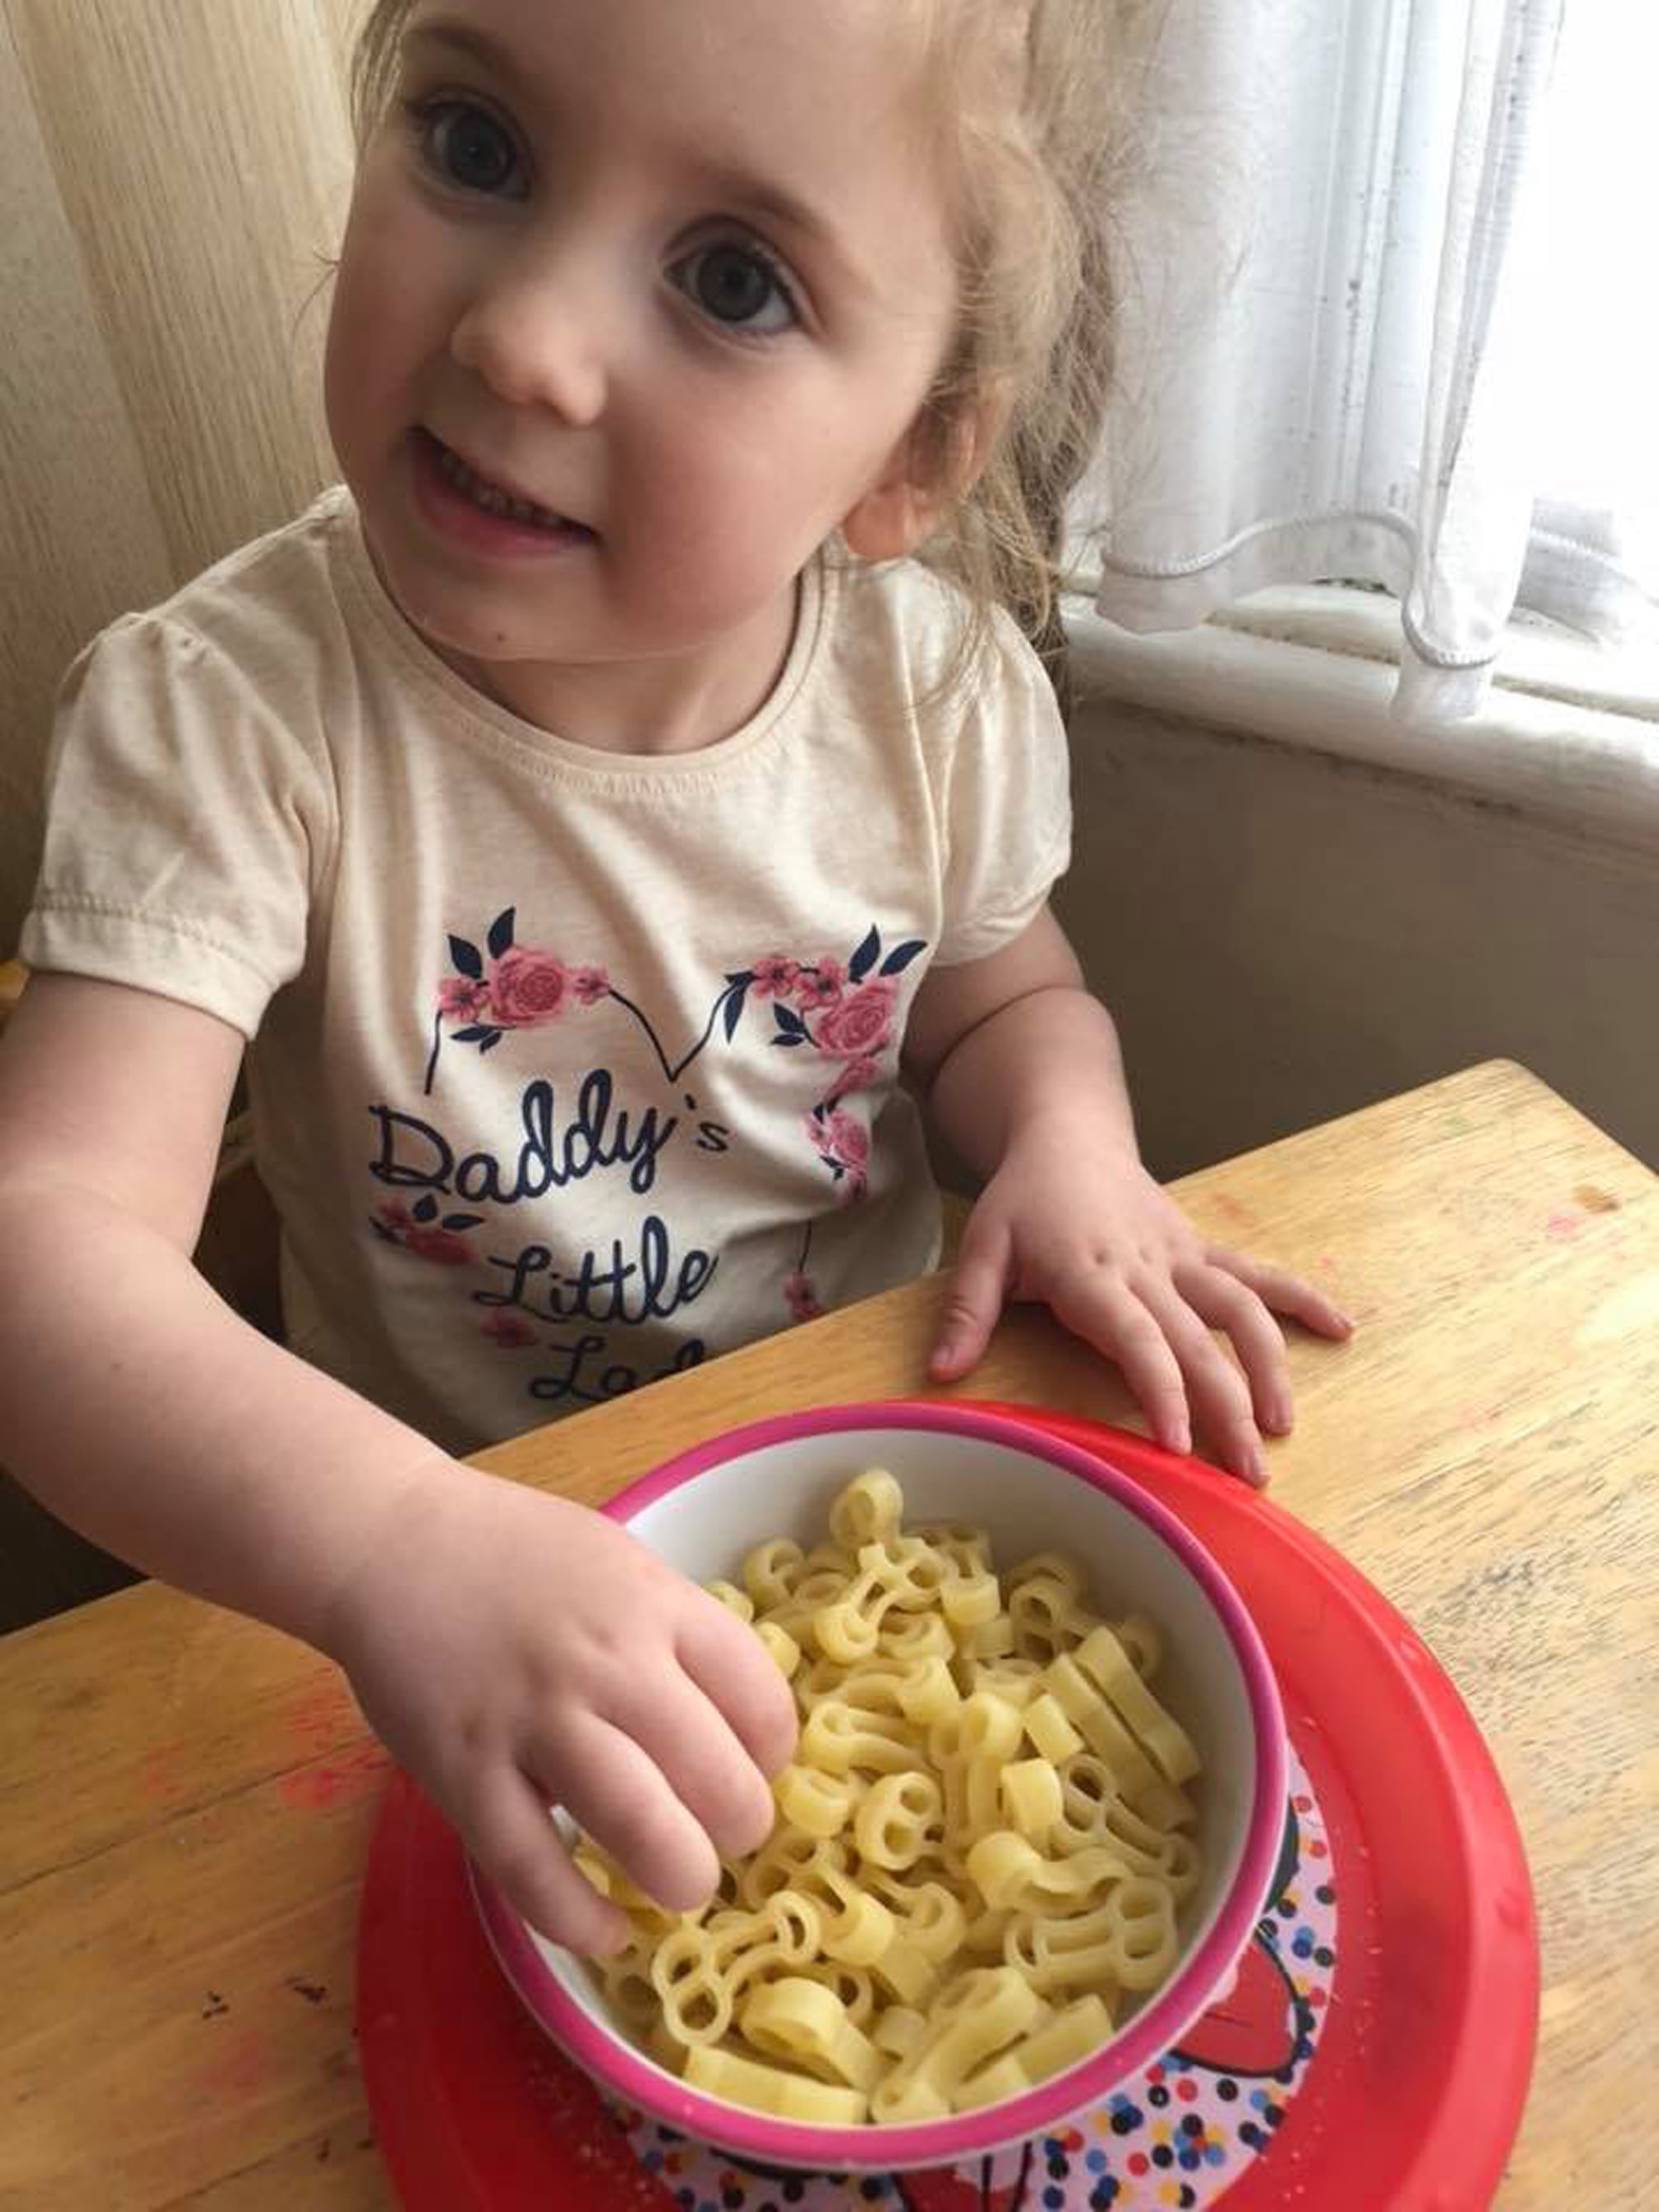 Mom Buys Penis-Shaped Pasta For Kids by Accident | POPSUGAR Family